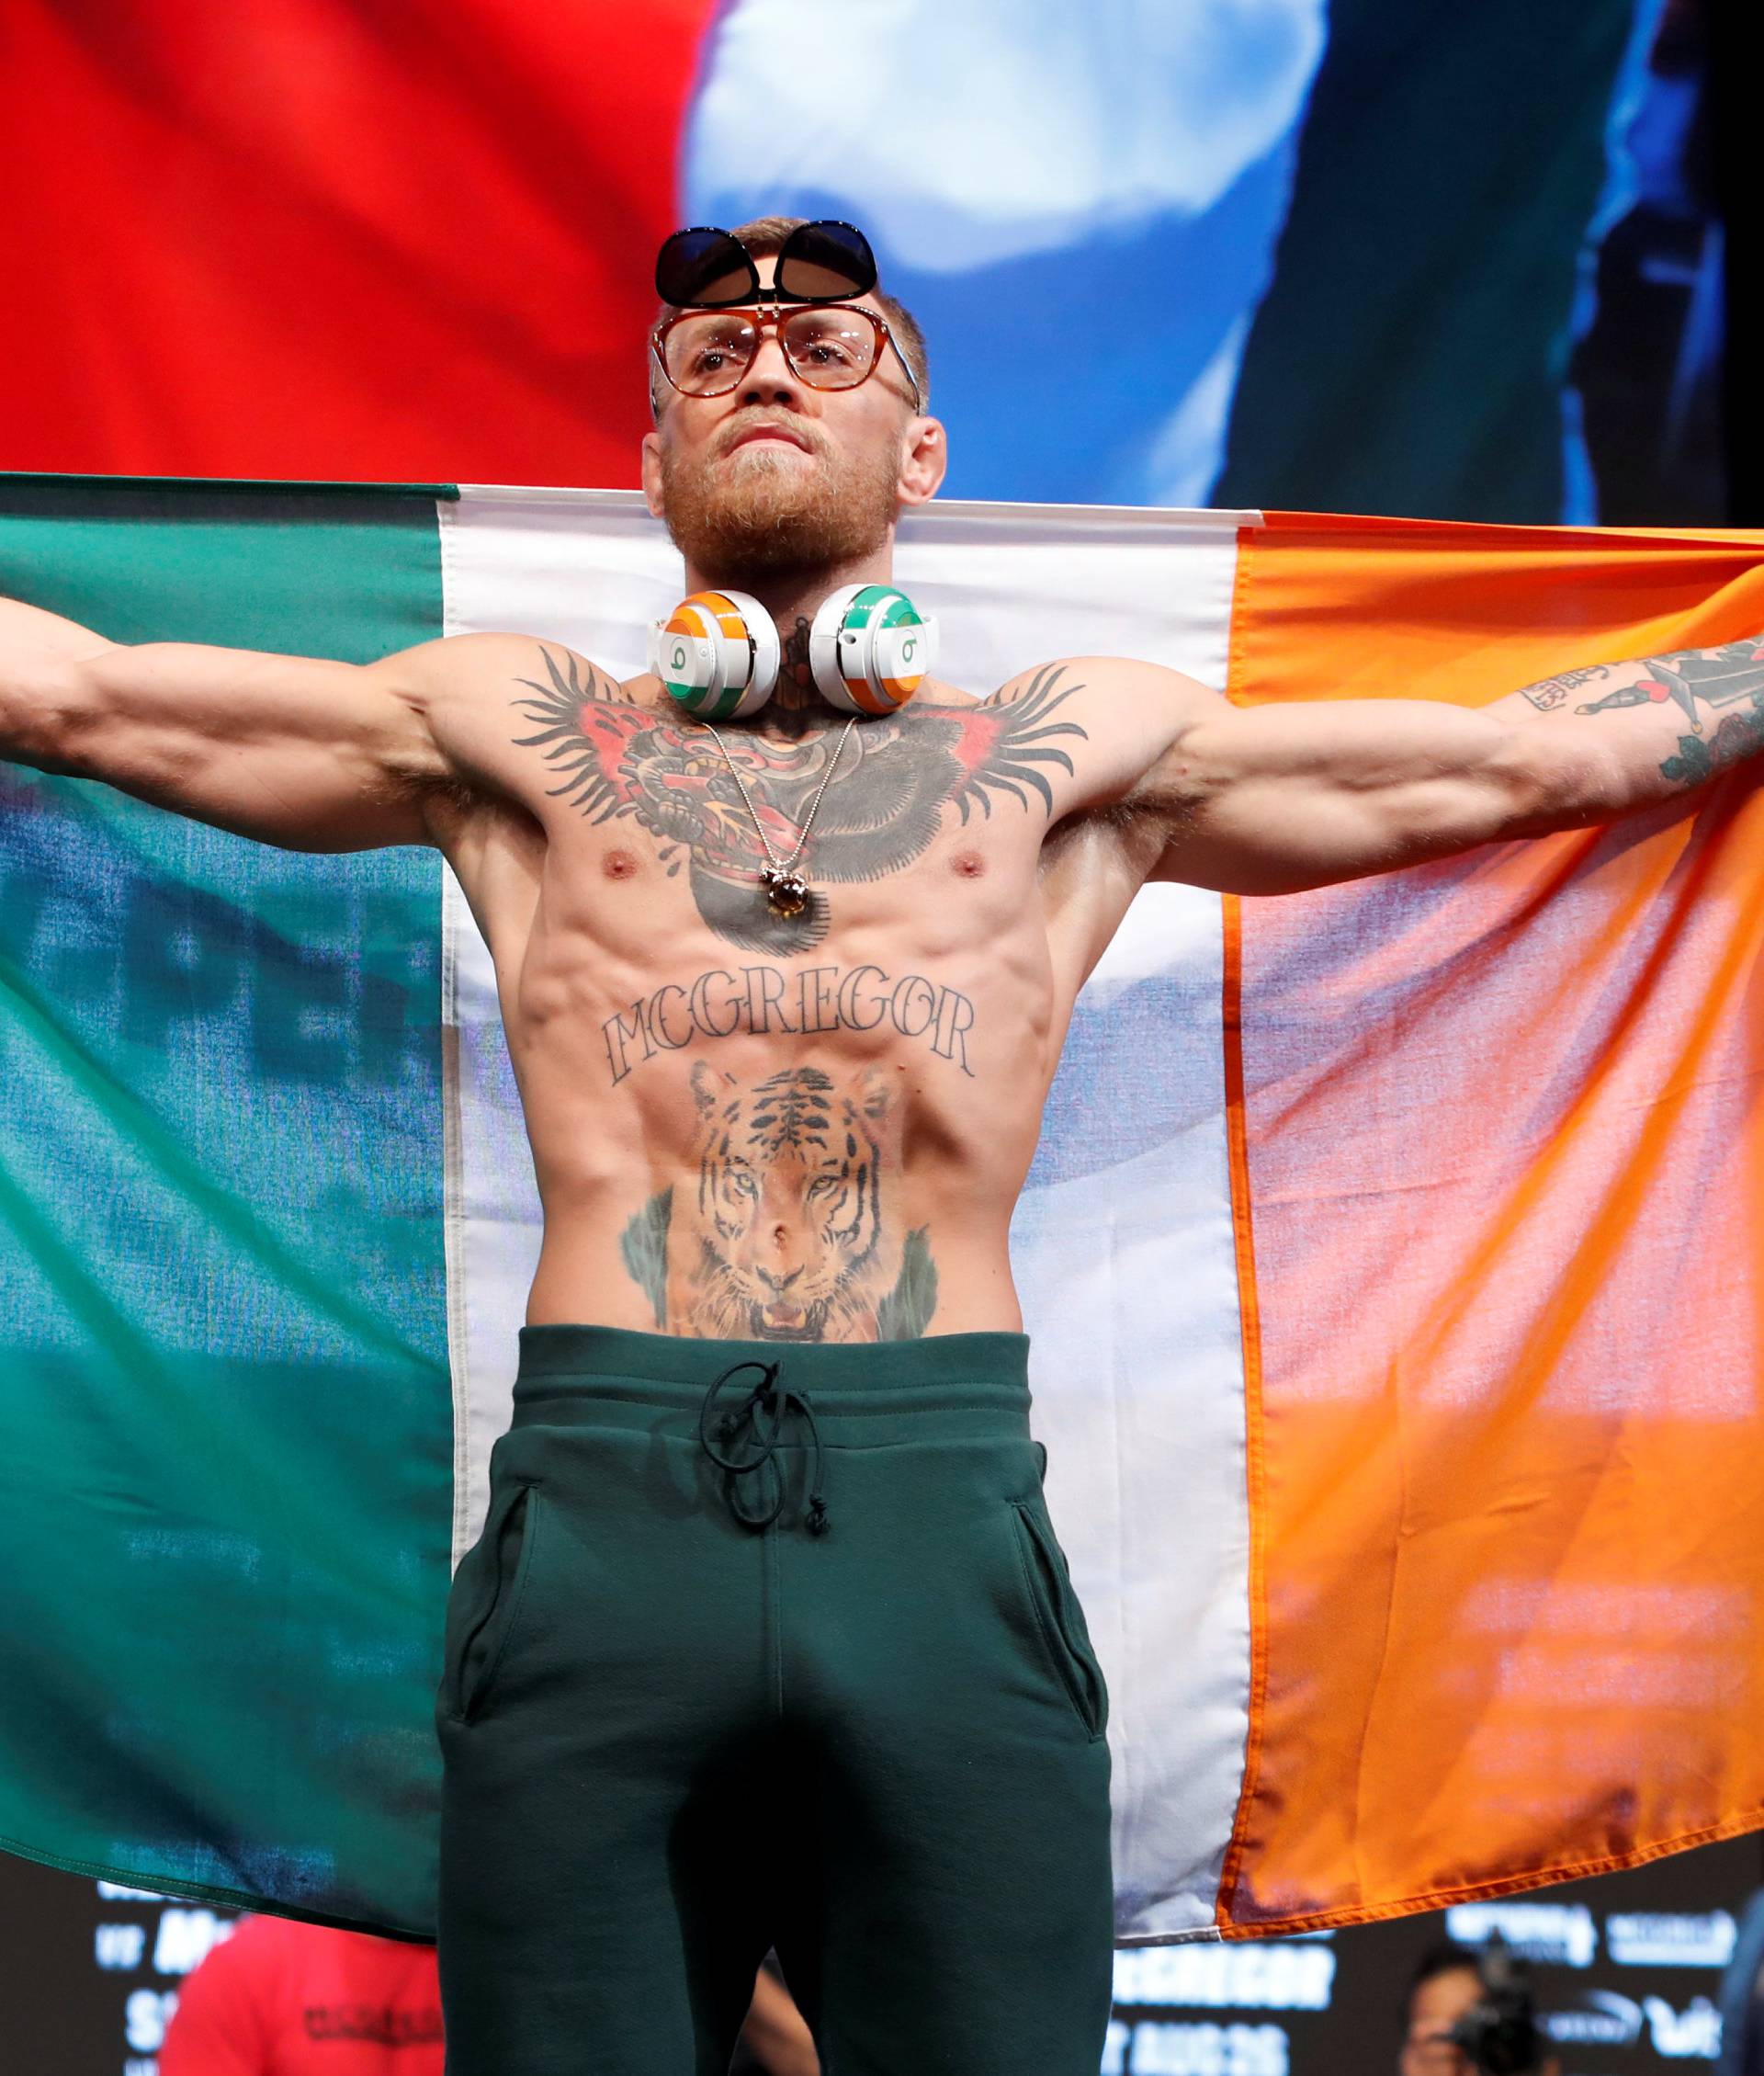 UFC lightweight champion Conor McGregor of Ireland arrives on stage for his official weigh-in at T-Mobile Arena in Las Vegas